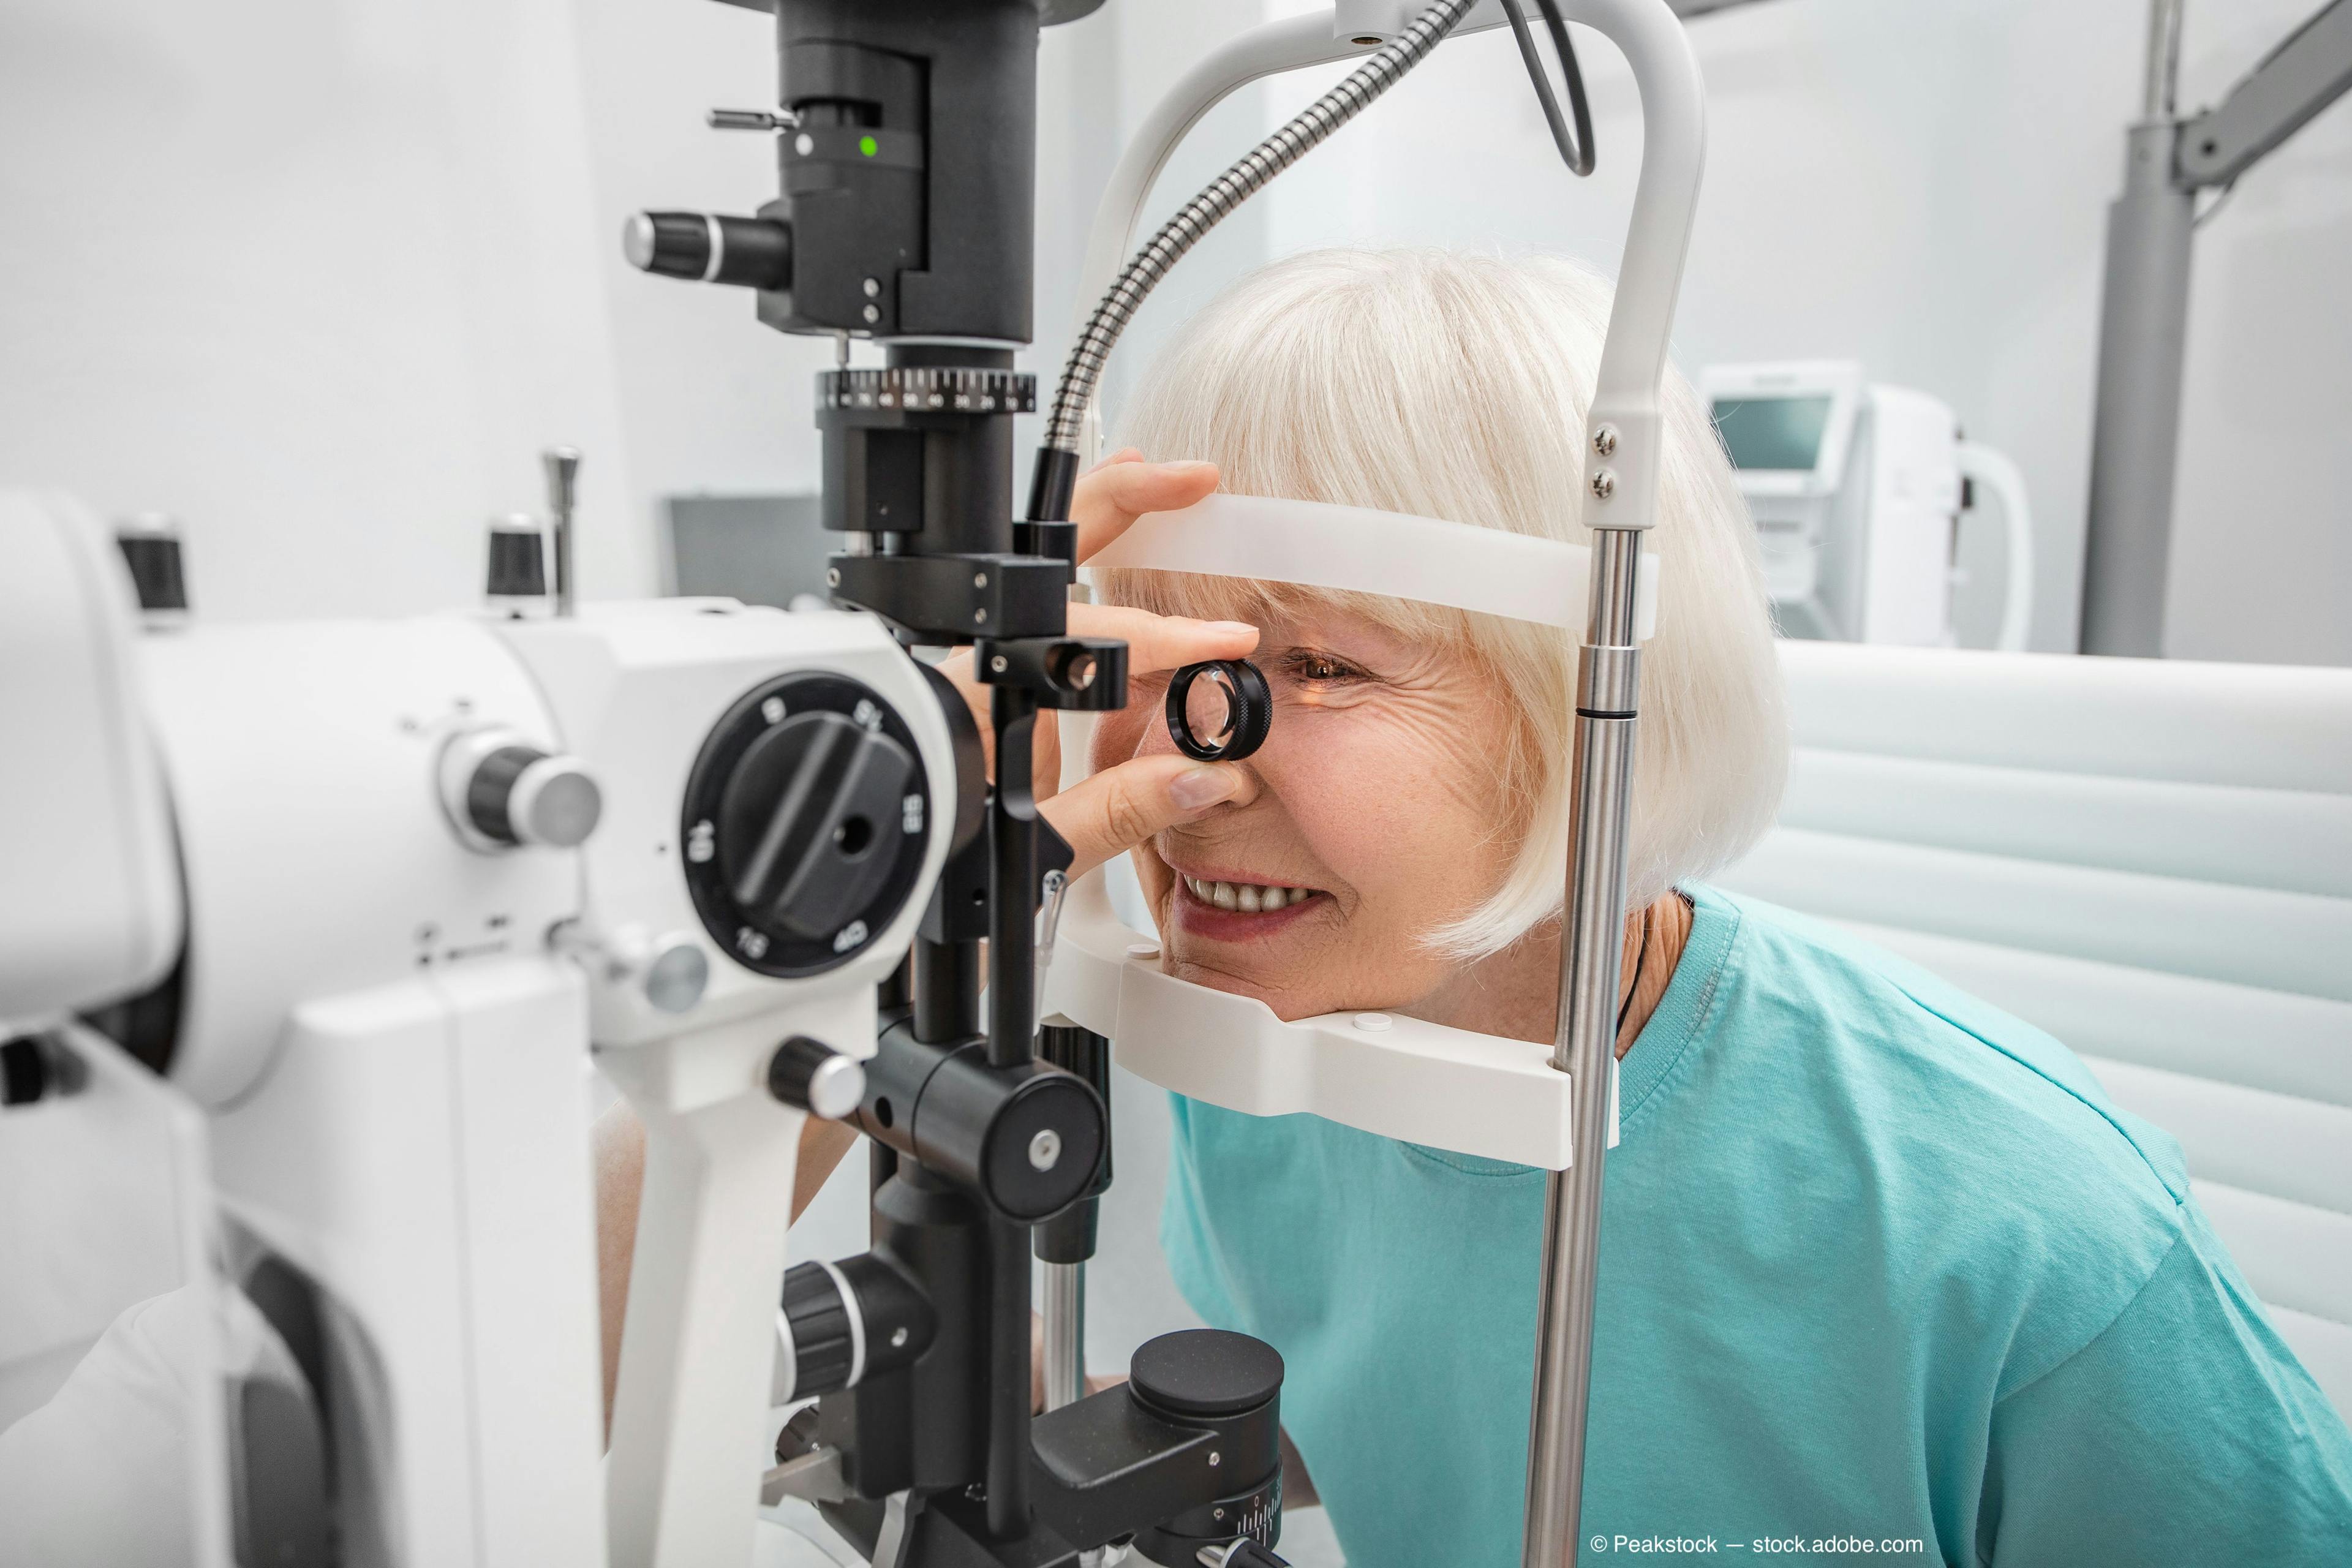 Dropless glaucoma treatment an elusive path to ease burden